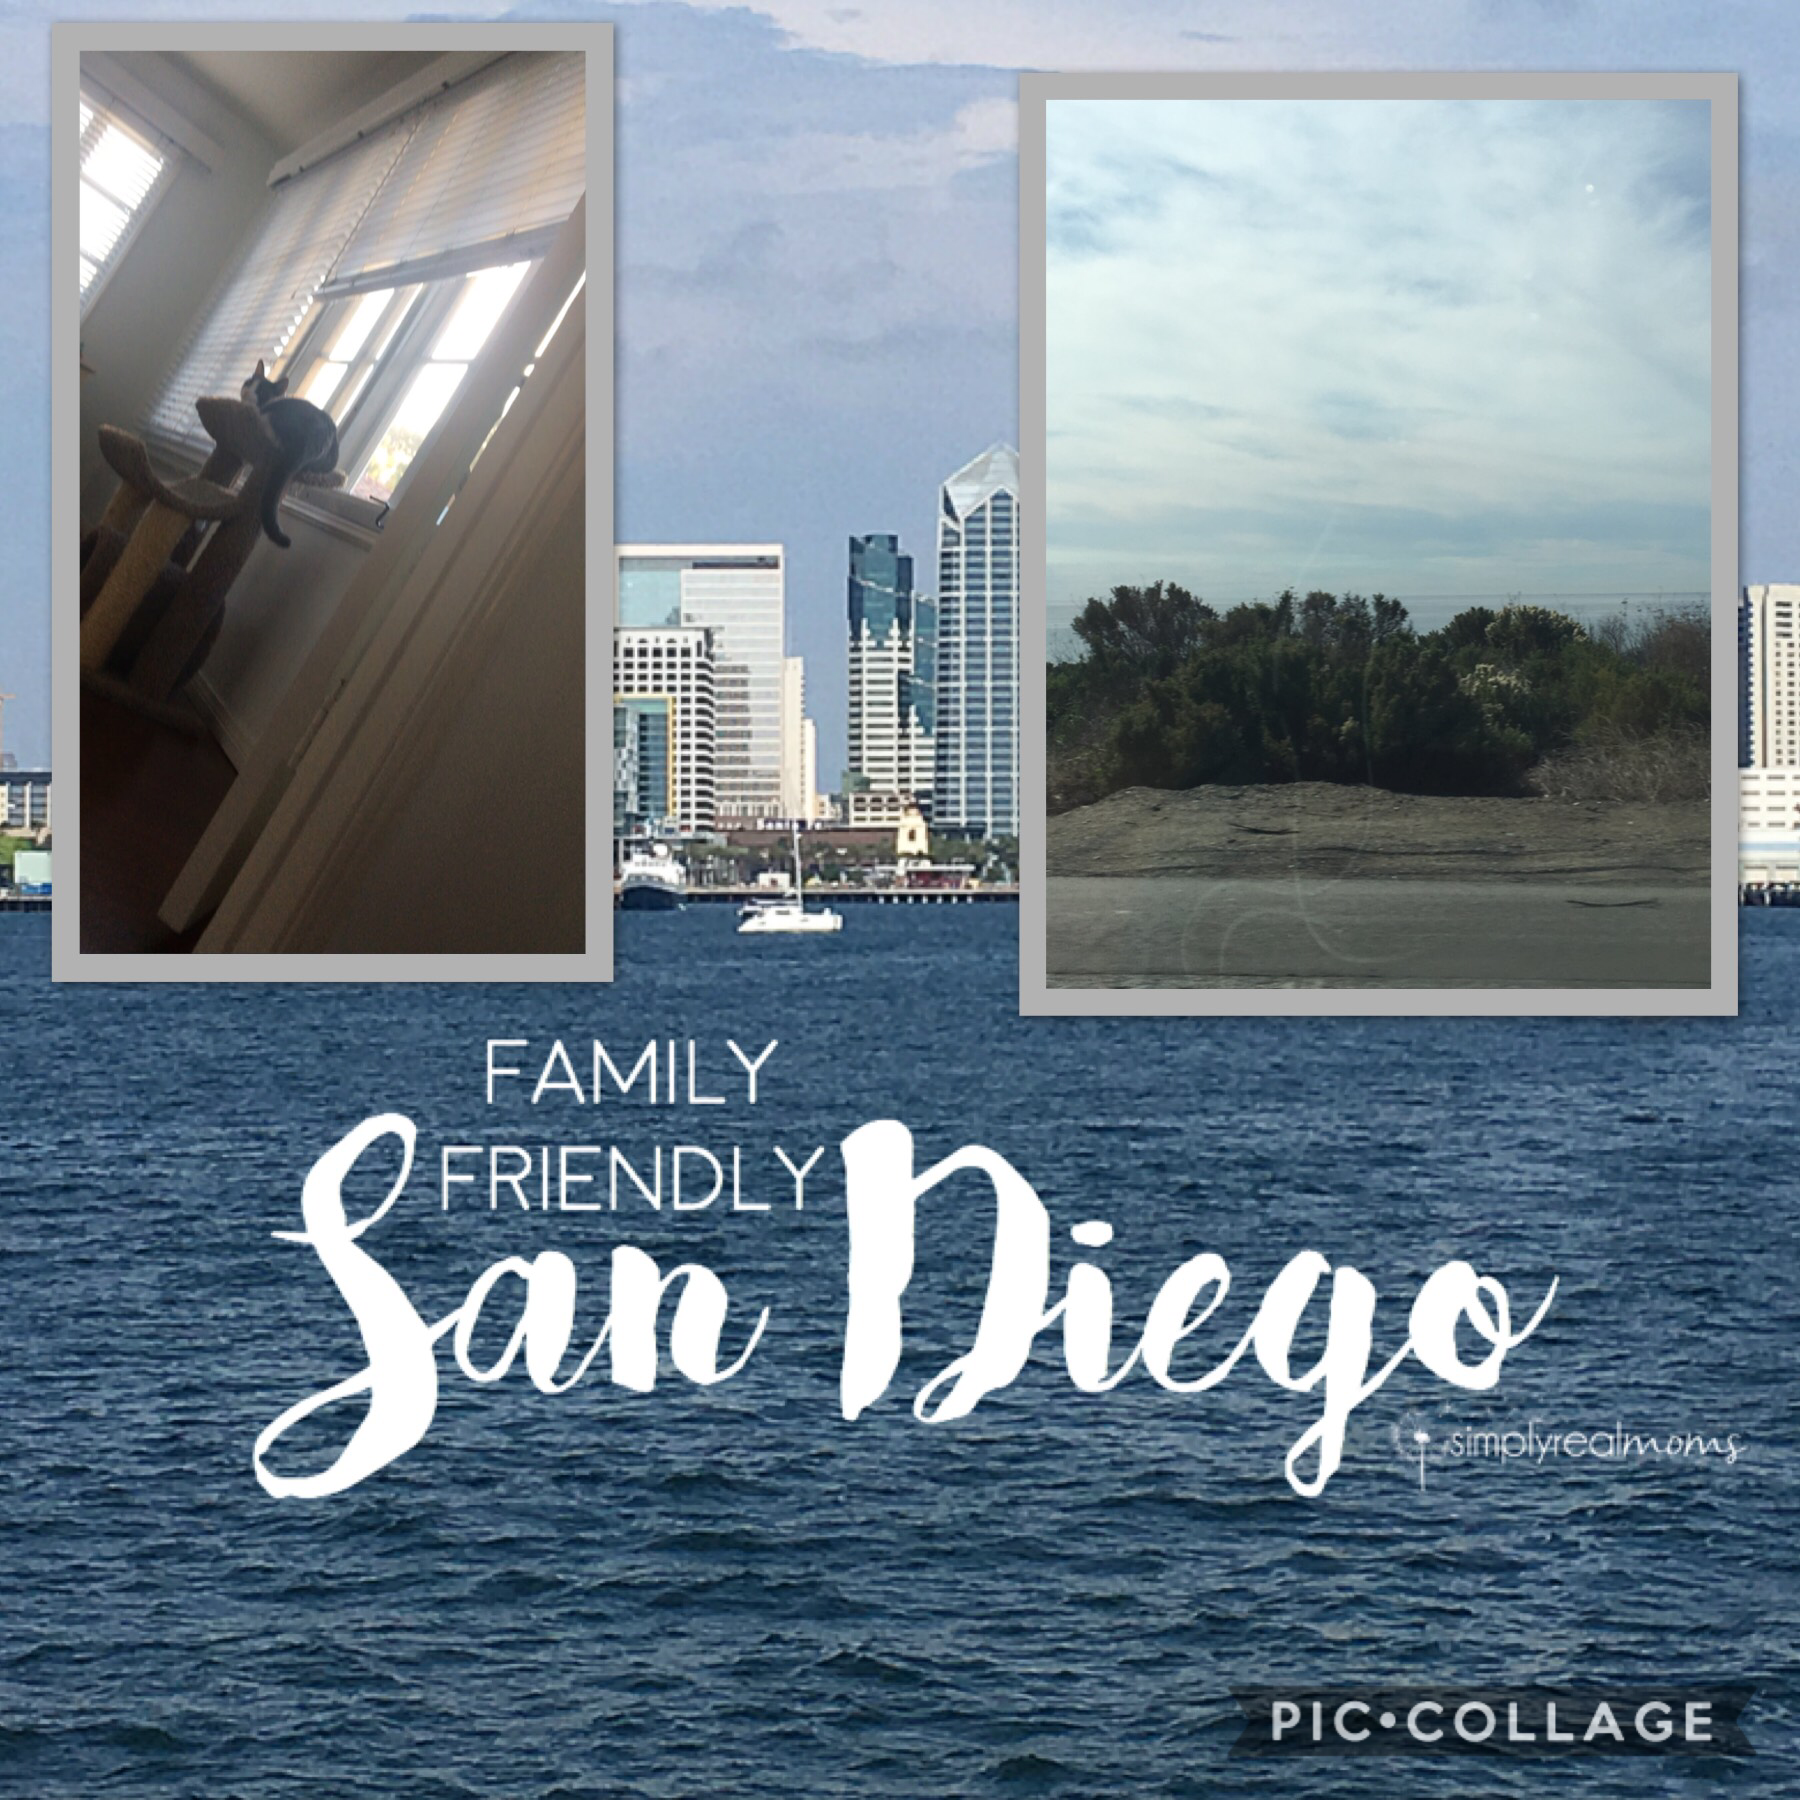 In San Diego for My Brothers Wedding ❤️❤️